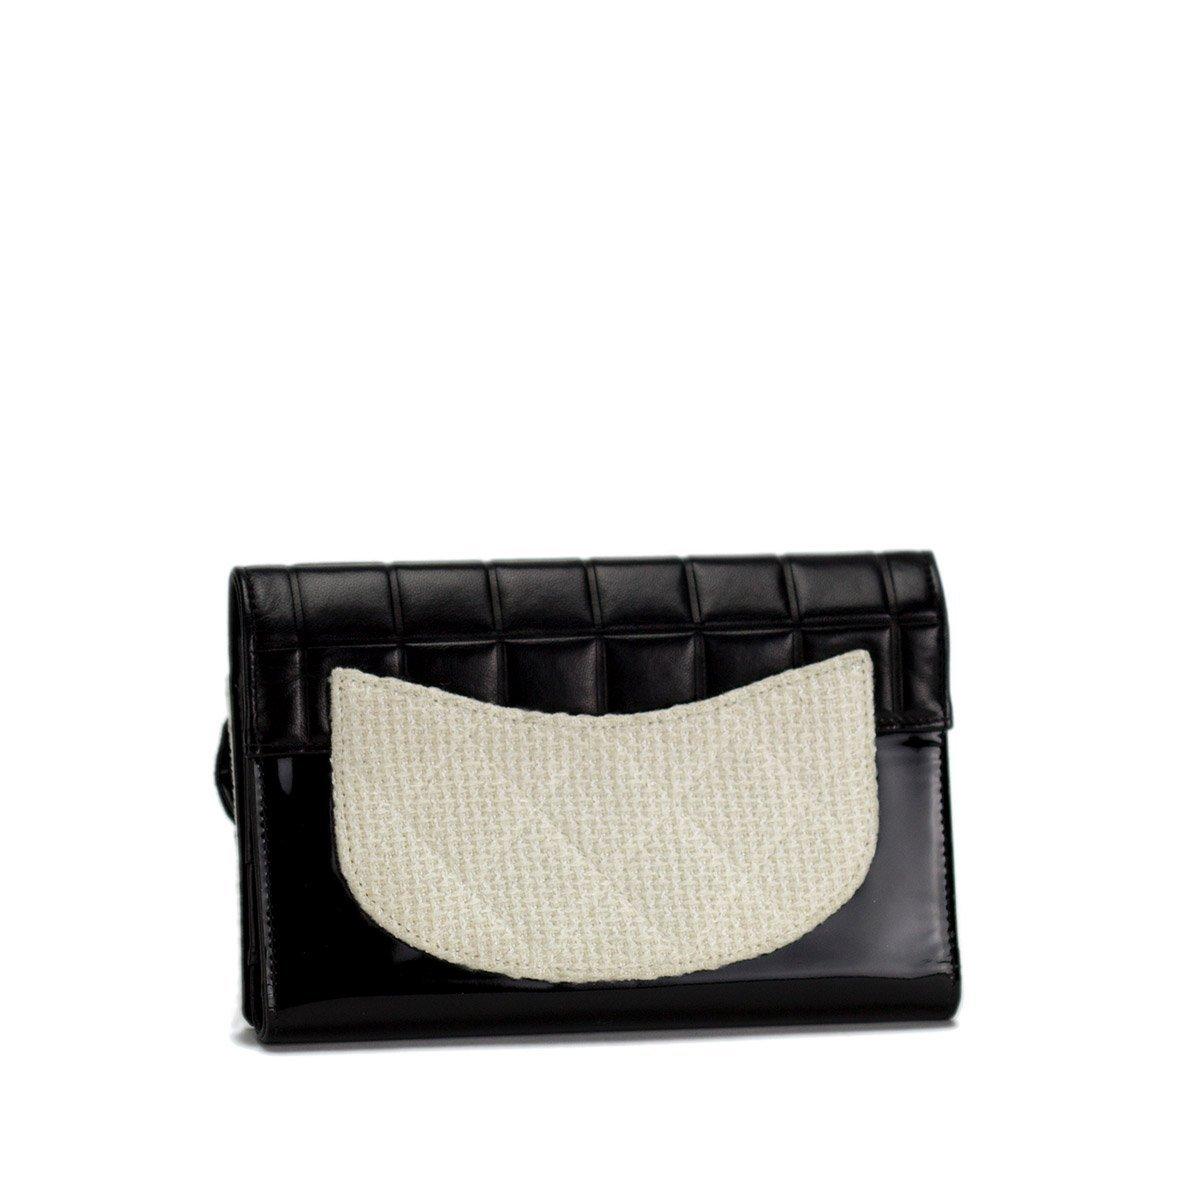 Chanel Timeless Tweed Iconic Camelia Flower Bicolor Black & White Leather Clutch For Sale 2